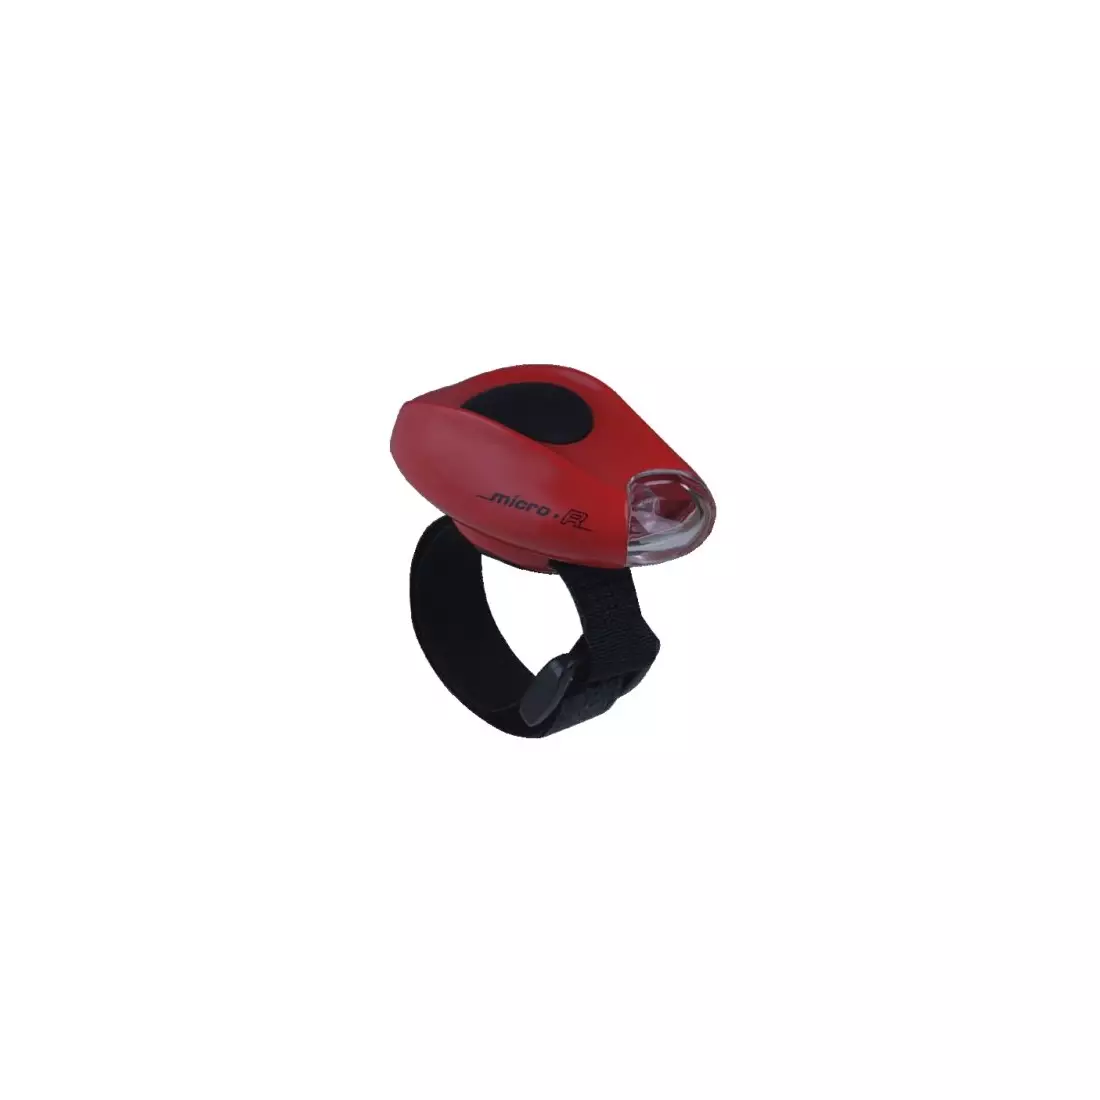 SIGMA SPORT - rear lamp - MICRO R - red - color: Red